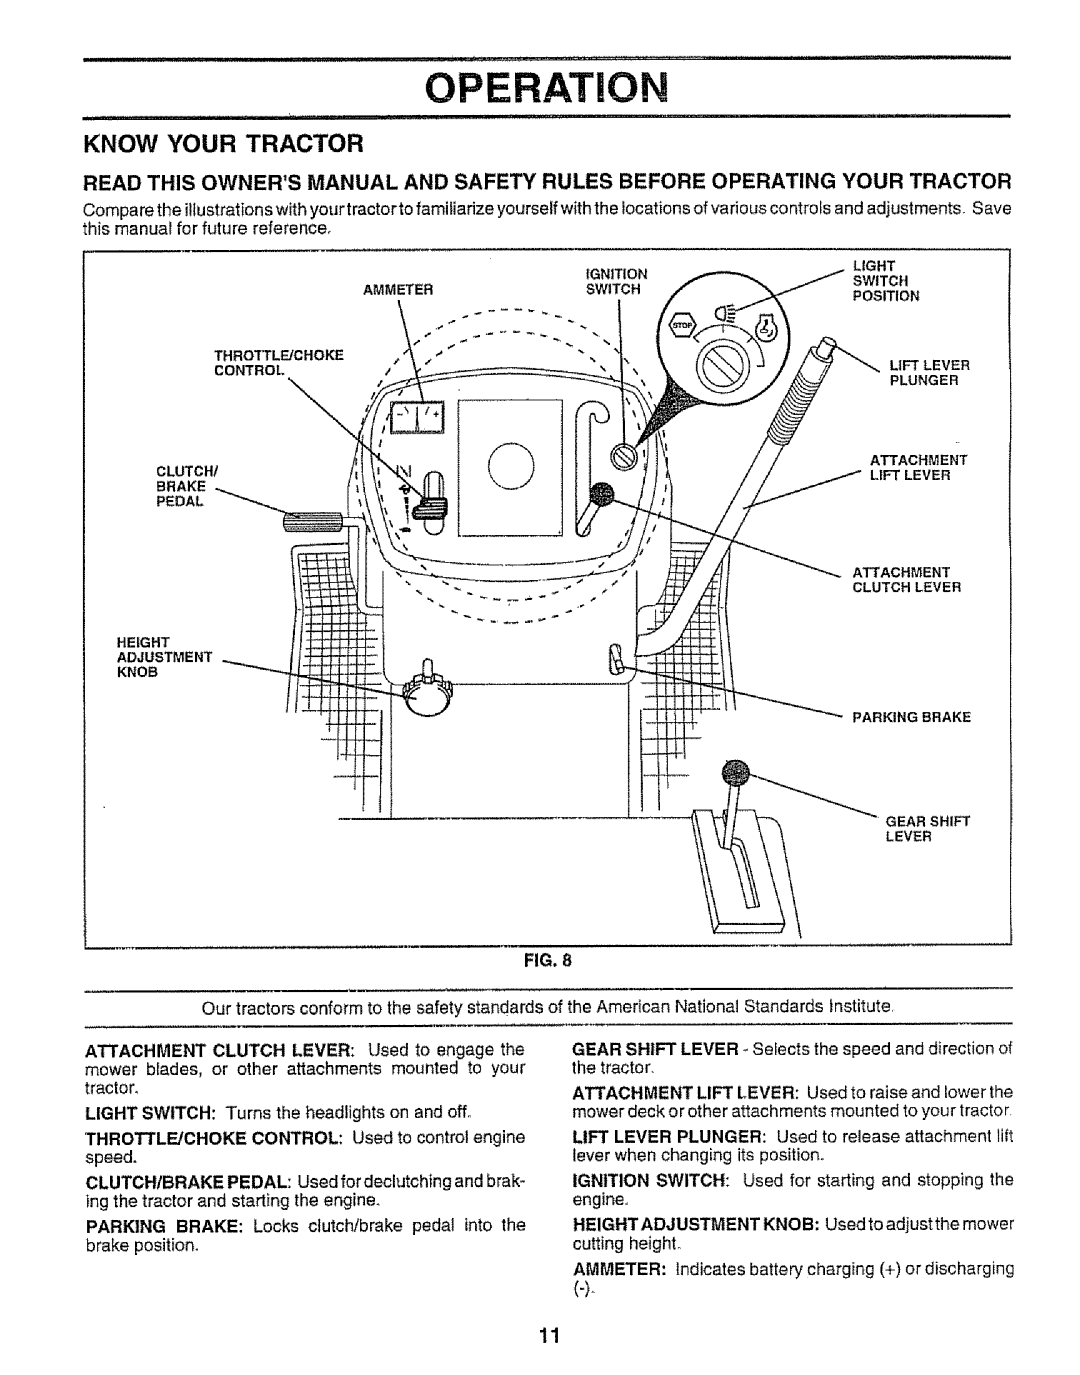 Sears 917.258542 owner manual Operation, Know Your Tractor, Fig 